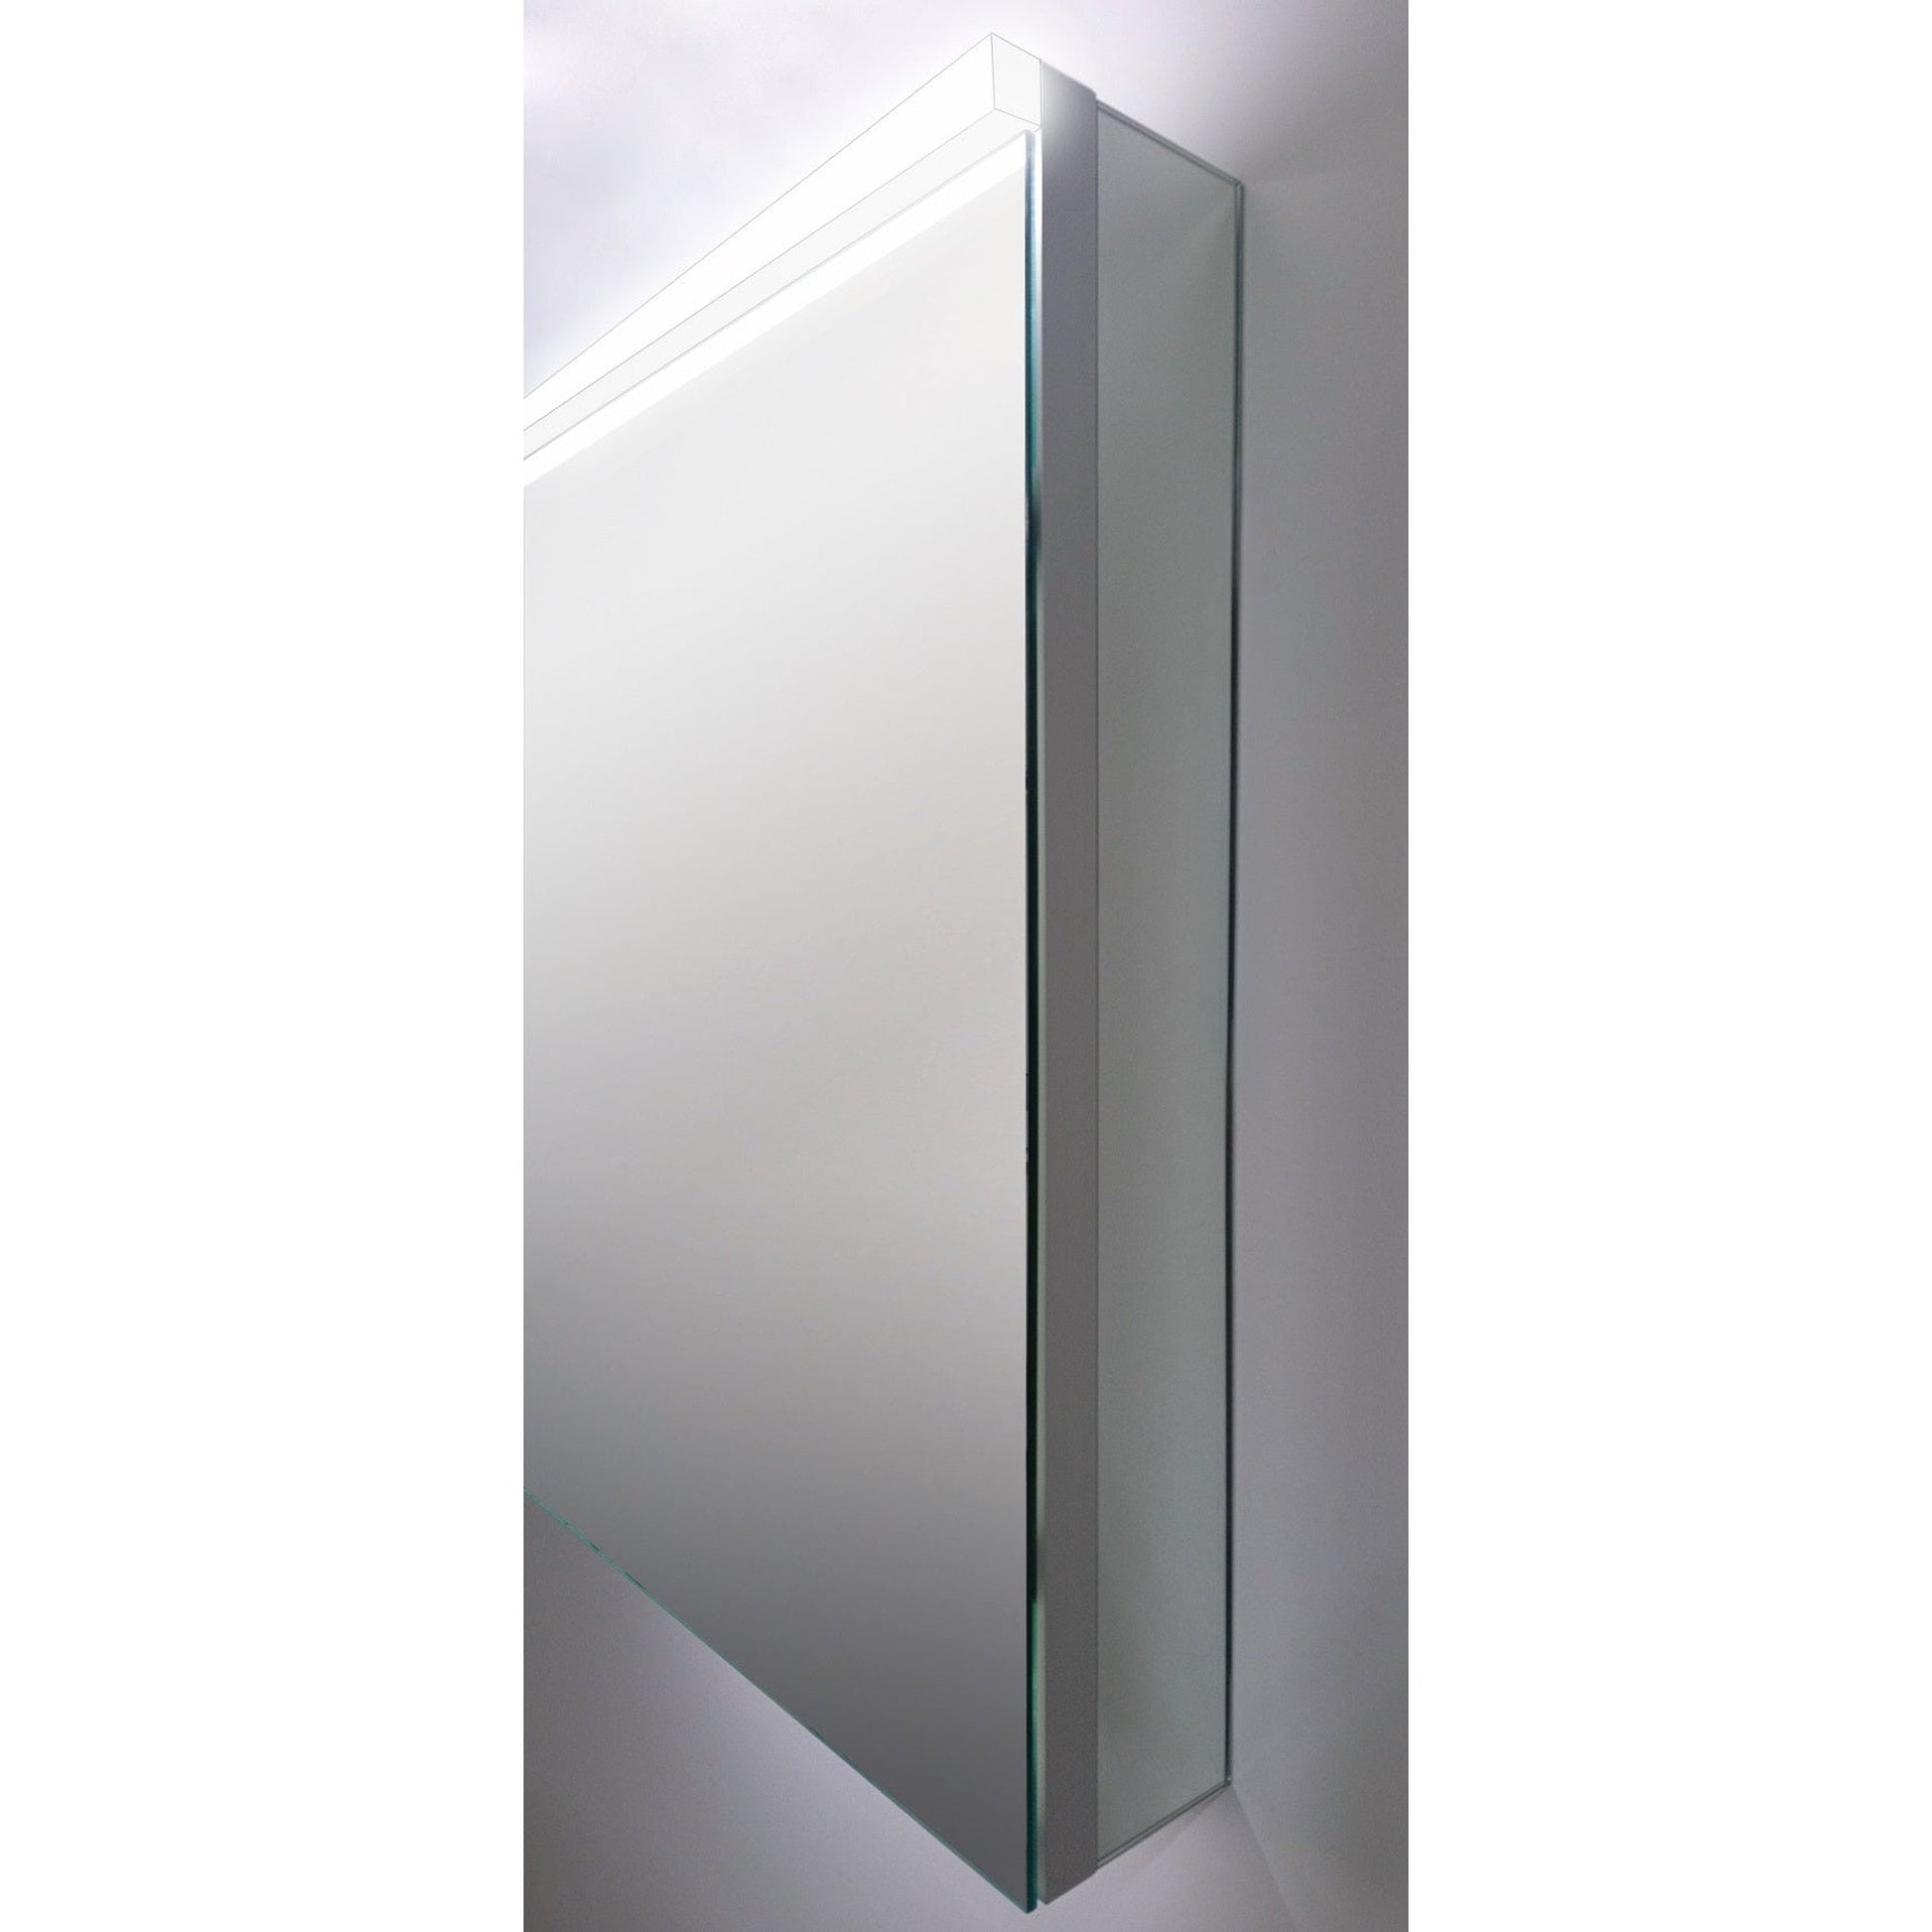 Sidler Xamo 24" x 30" 4000K Single Mirror Left Hinged Door Medicine Cabinet With Built-in GFCI outlet and Night Light Function